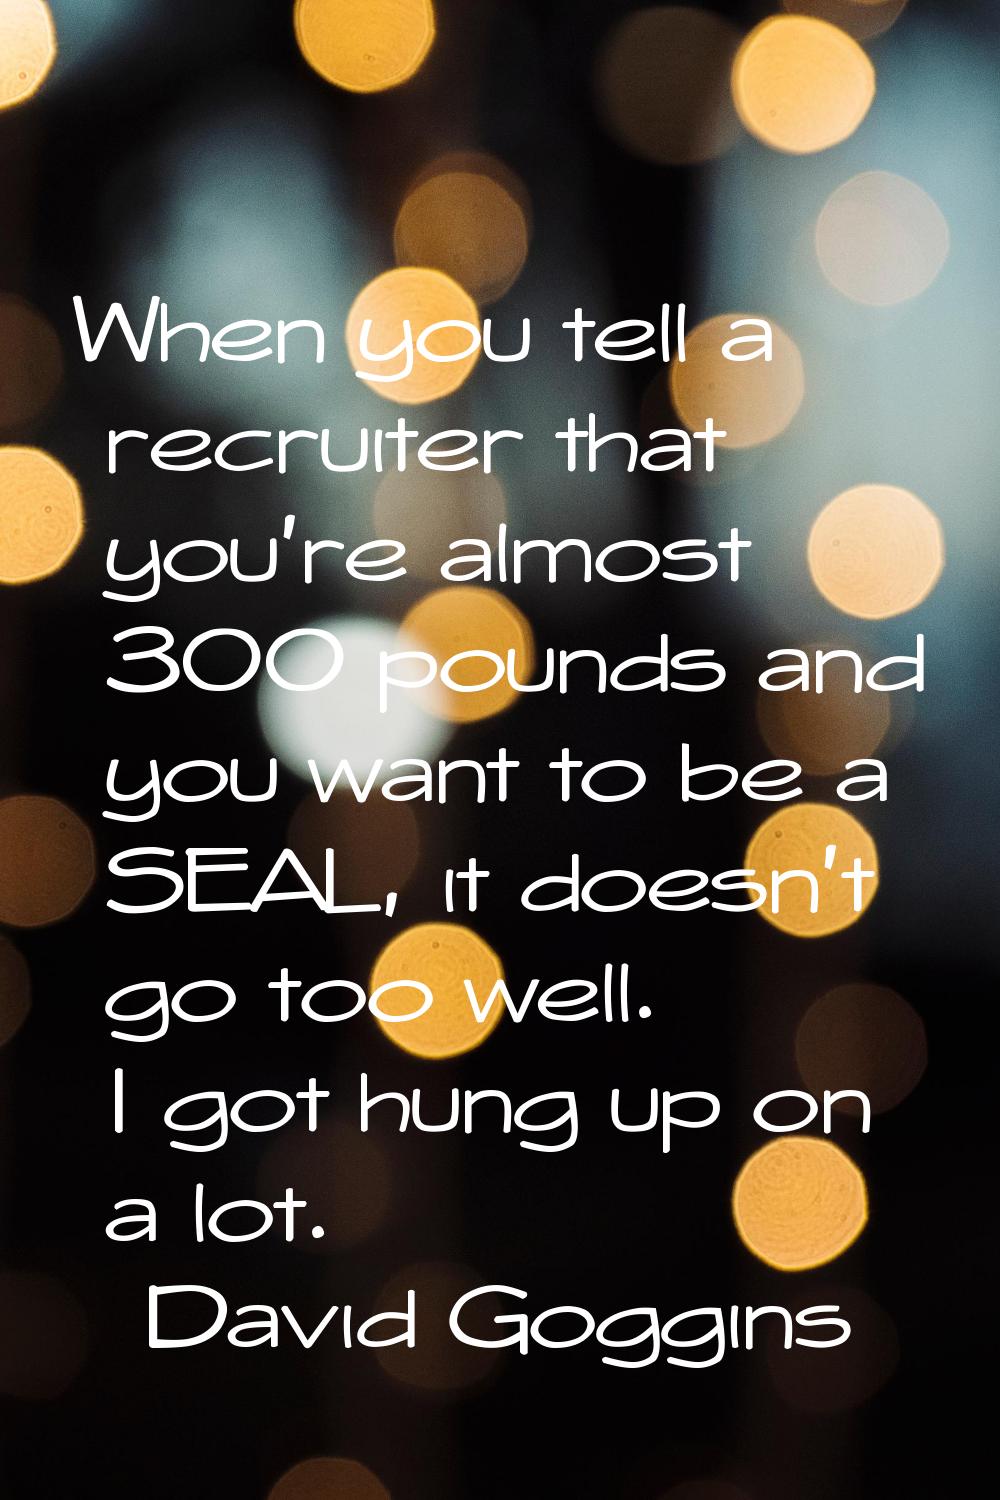 When you tell a recruiter that you're almost 300 pounds and you want to be a SEAL, it doesn't go to